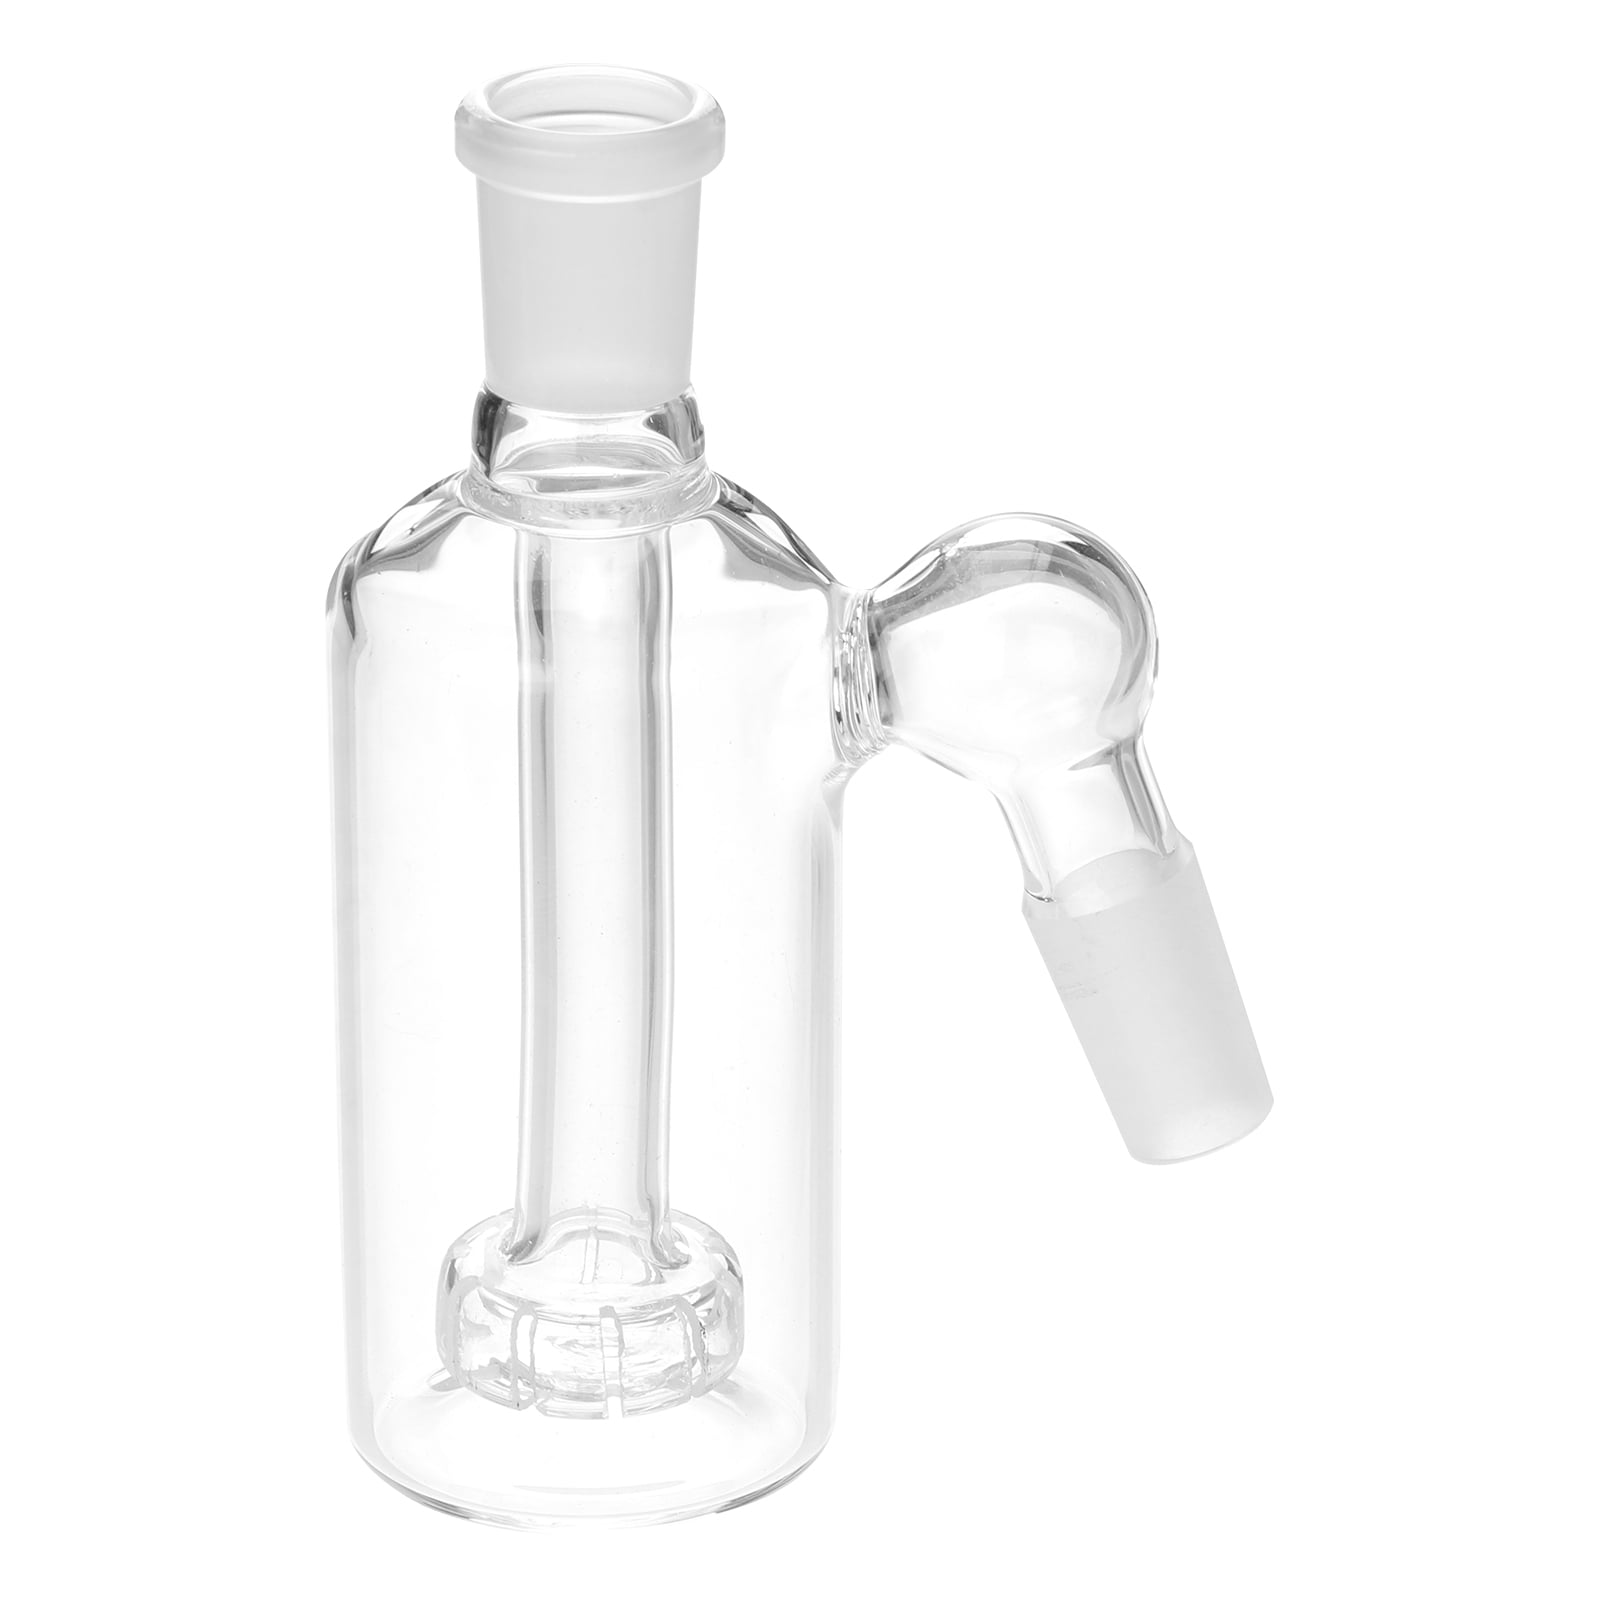 Scientific Glass Tube Adapter 18mm by 14mm Stem 4.1 inch Clear Glass Tube Downstem Adapter 